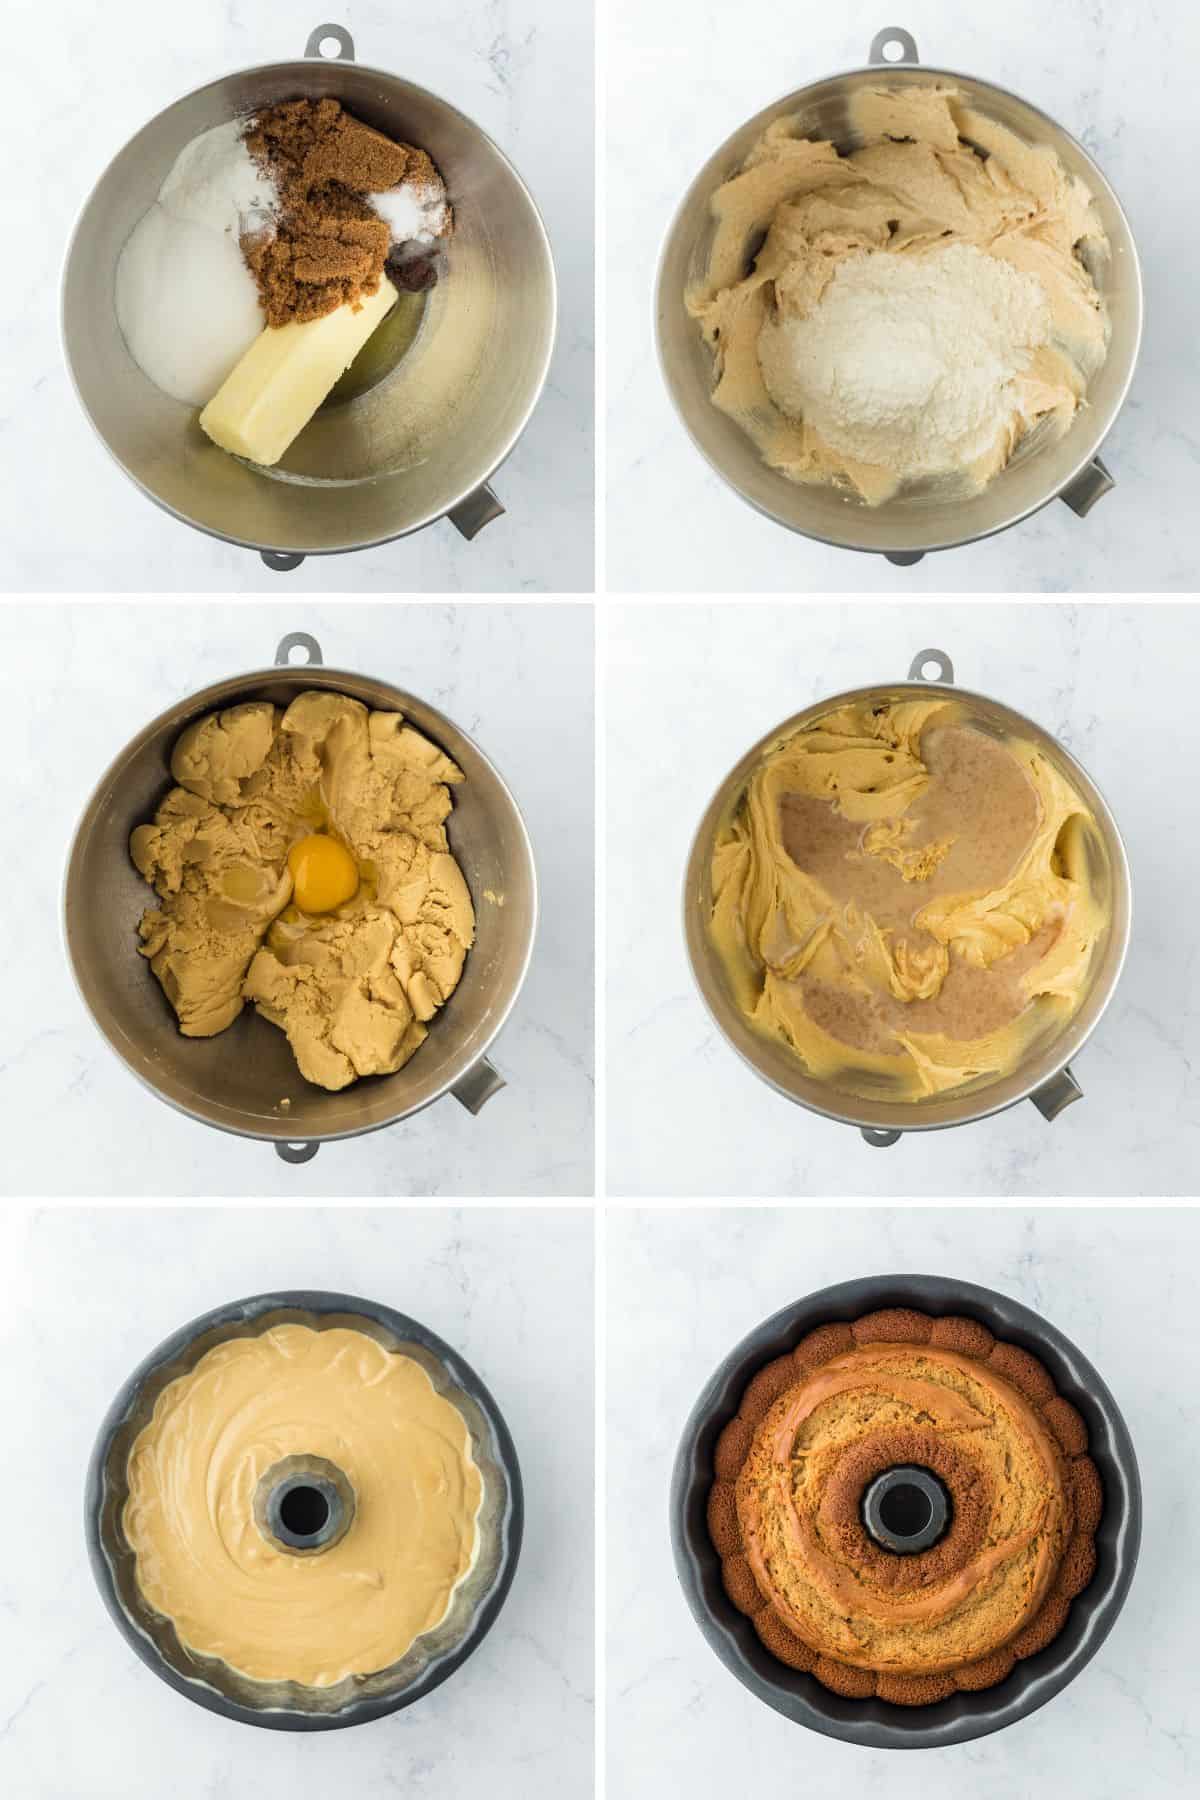 A step by step image collage on how to make rum cake with mixng the batter and baking the cake